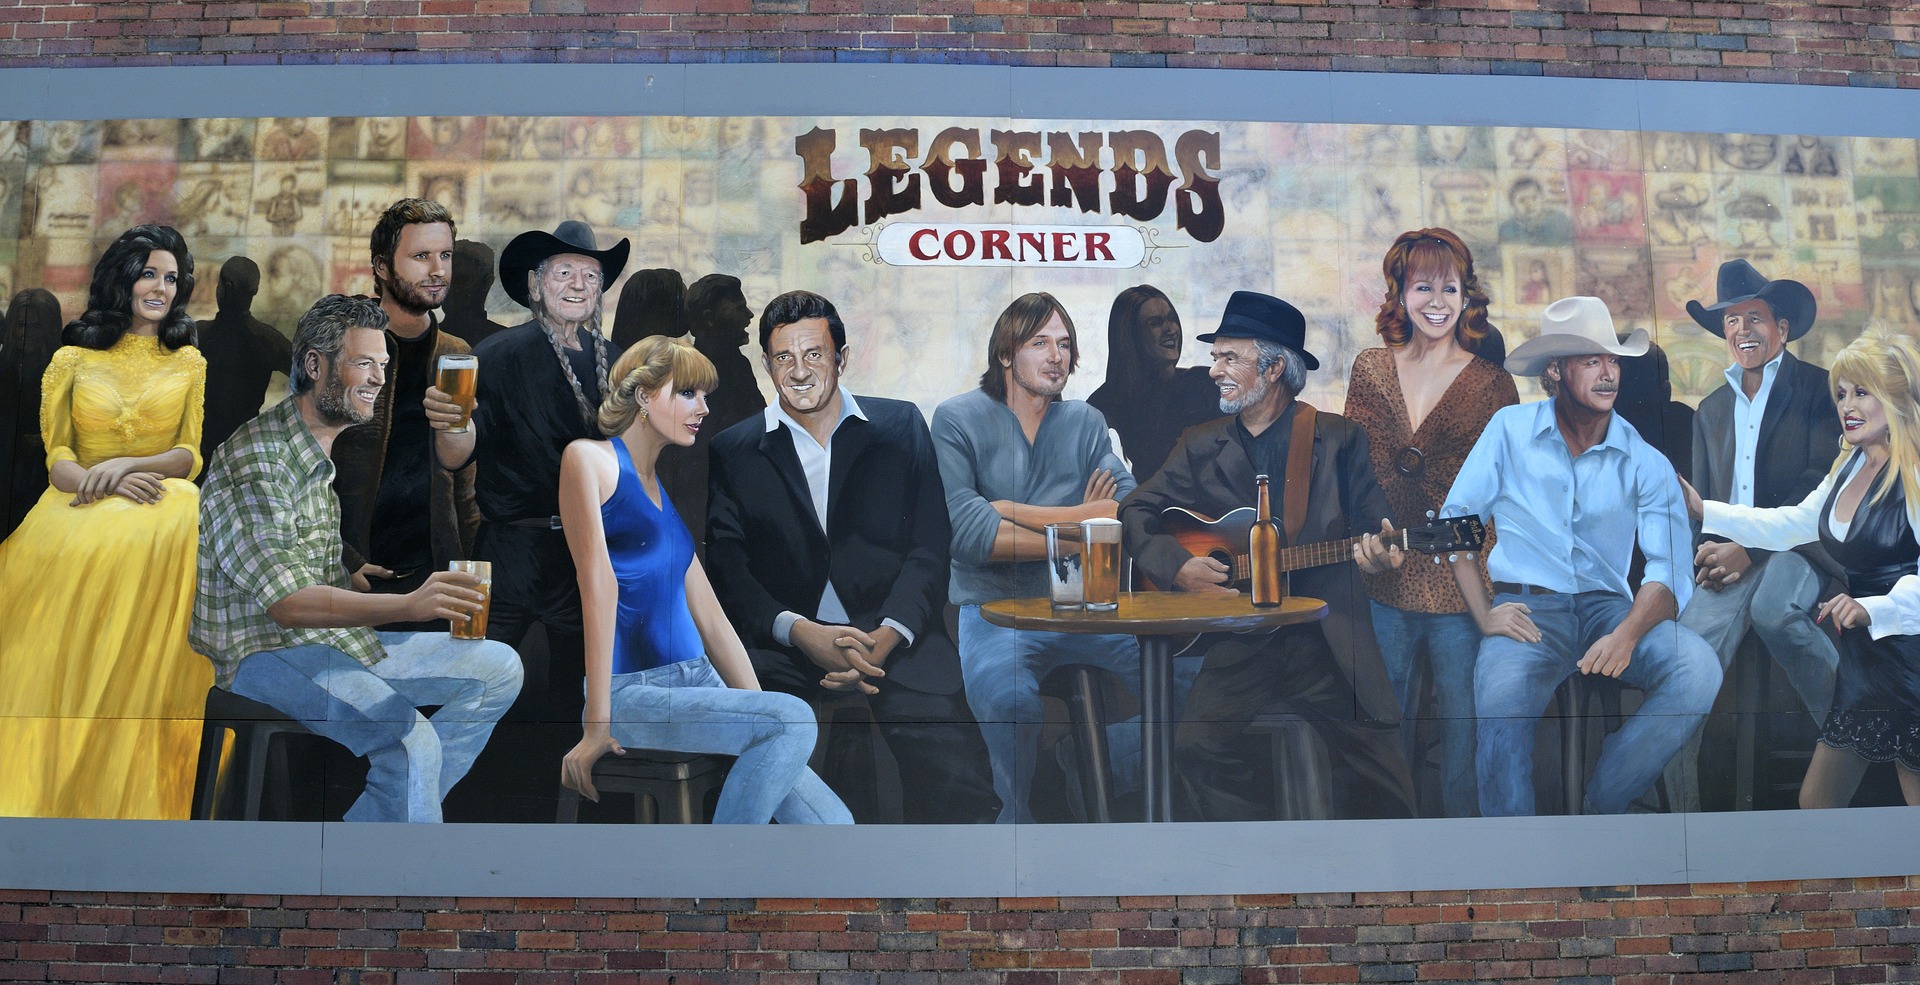 Country music legends on a mural